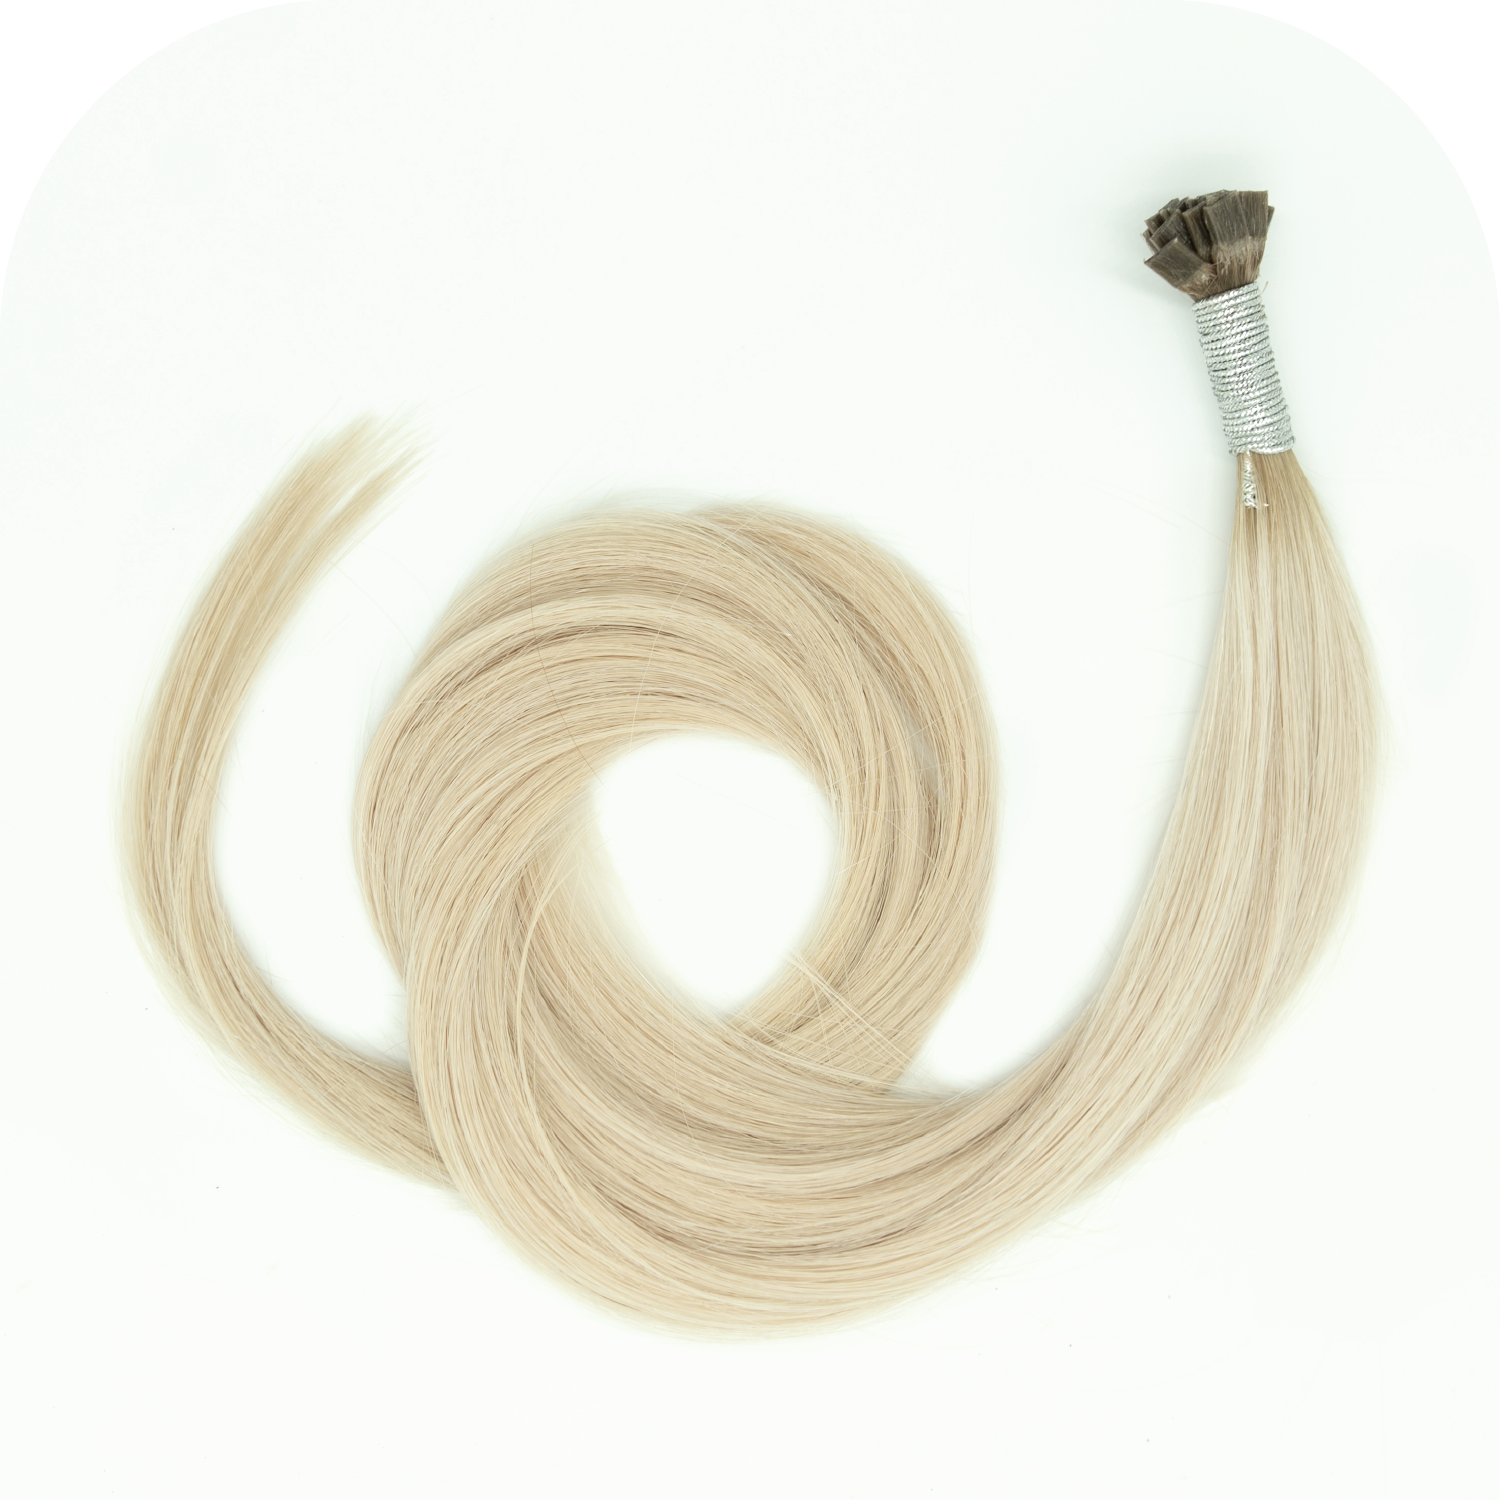 Couture Hair Co. Couture Tip or K Tip Hair Extension in Color Rooted Platinum #8/60